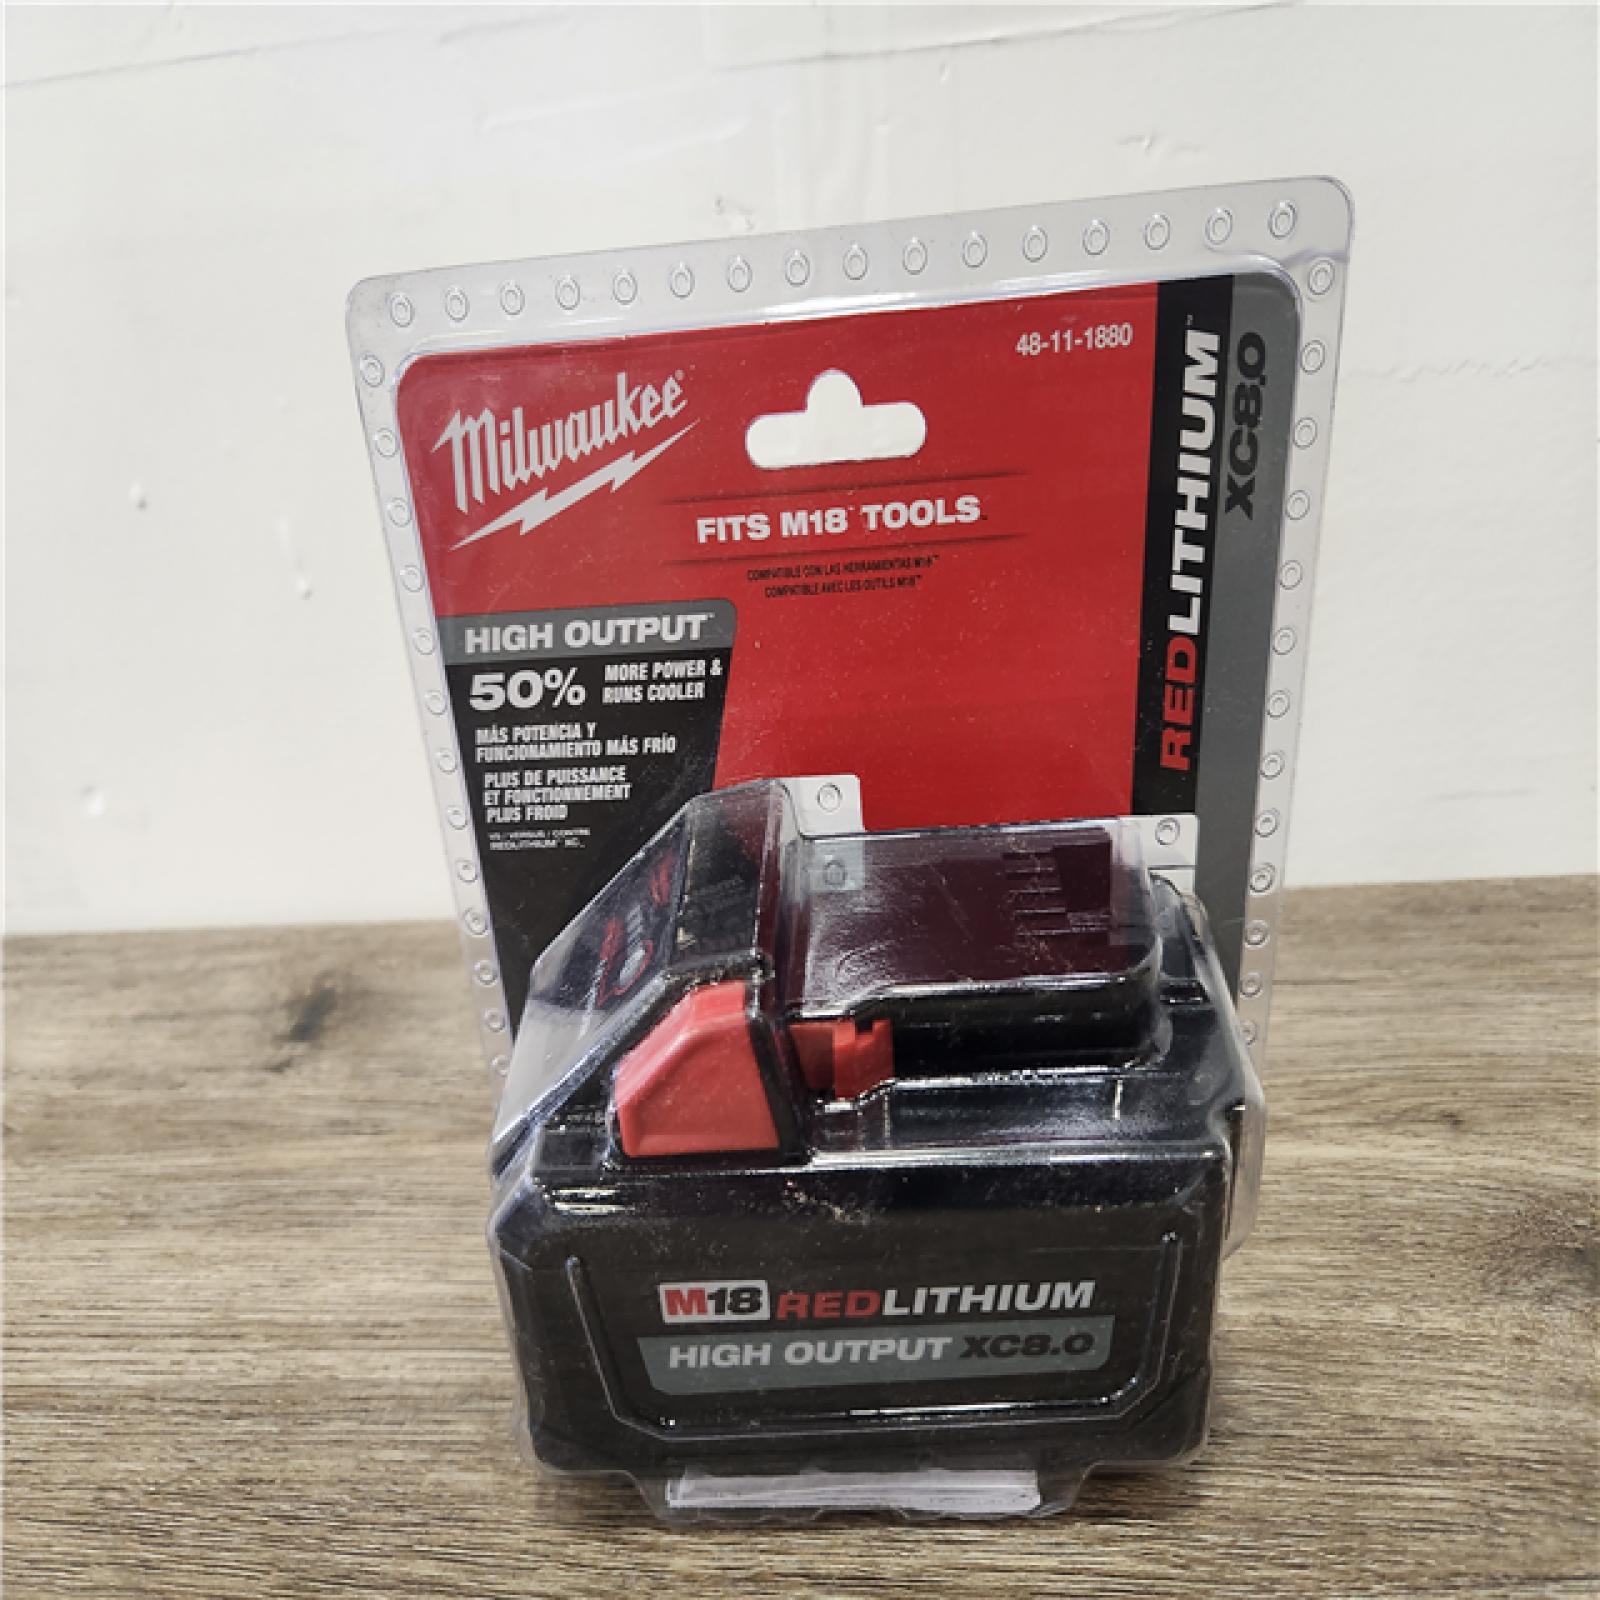 Phoenix Location NEWLY SEALED Milwaukee M18 18-Volt Lithium-Ion HIGH OUTPUT XC 8.0 Ah Battery